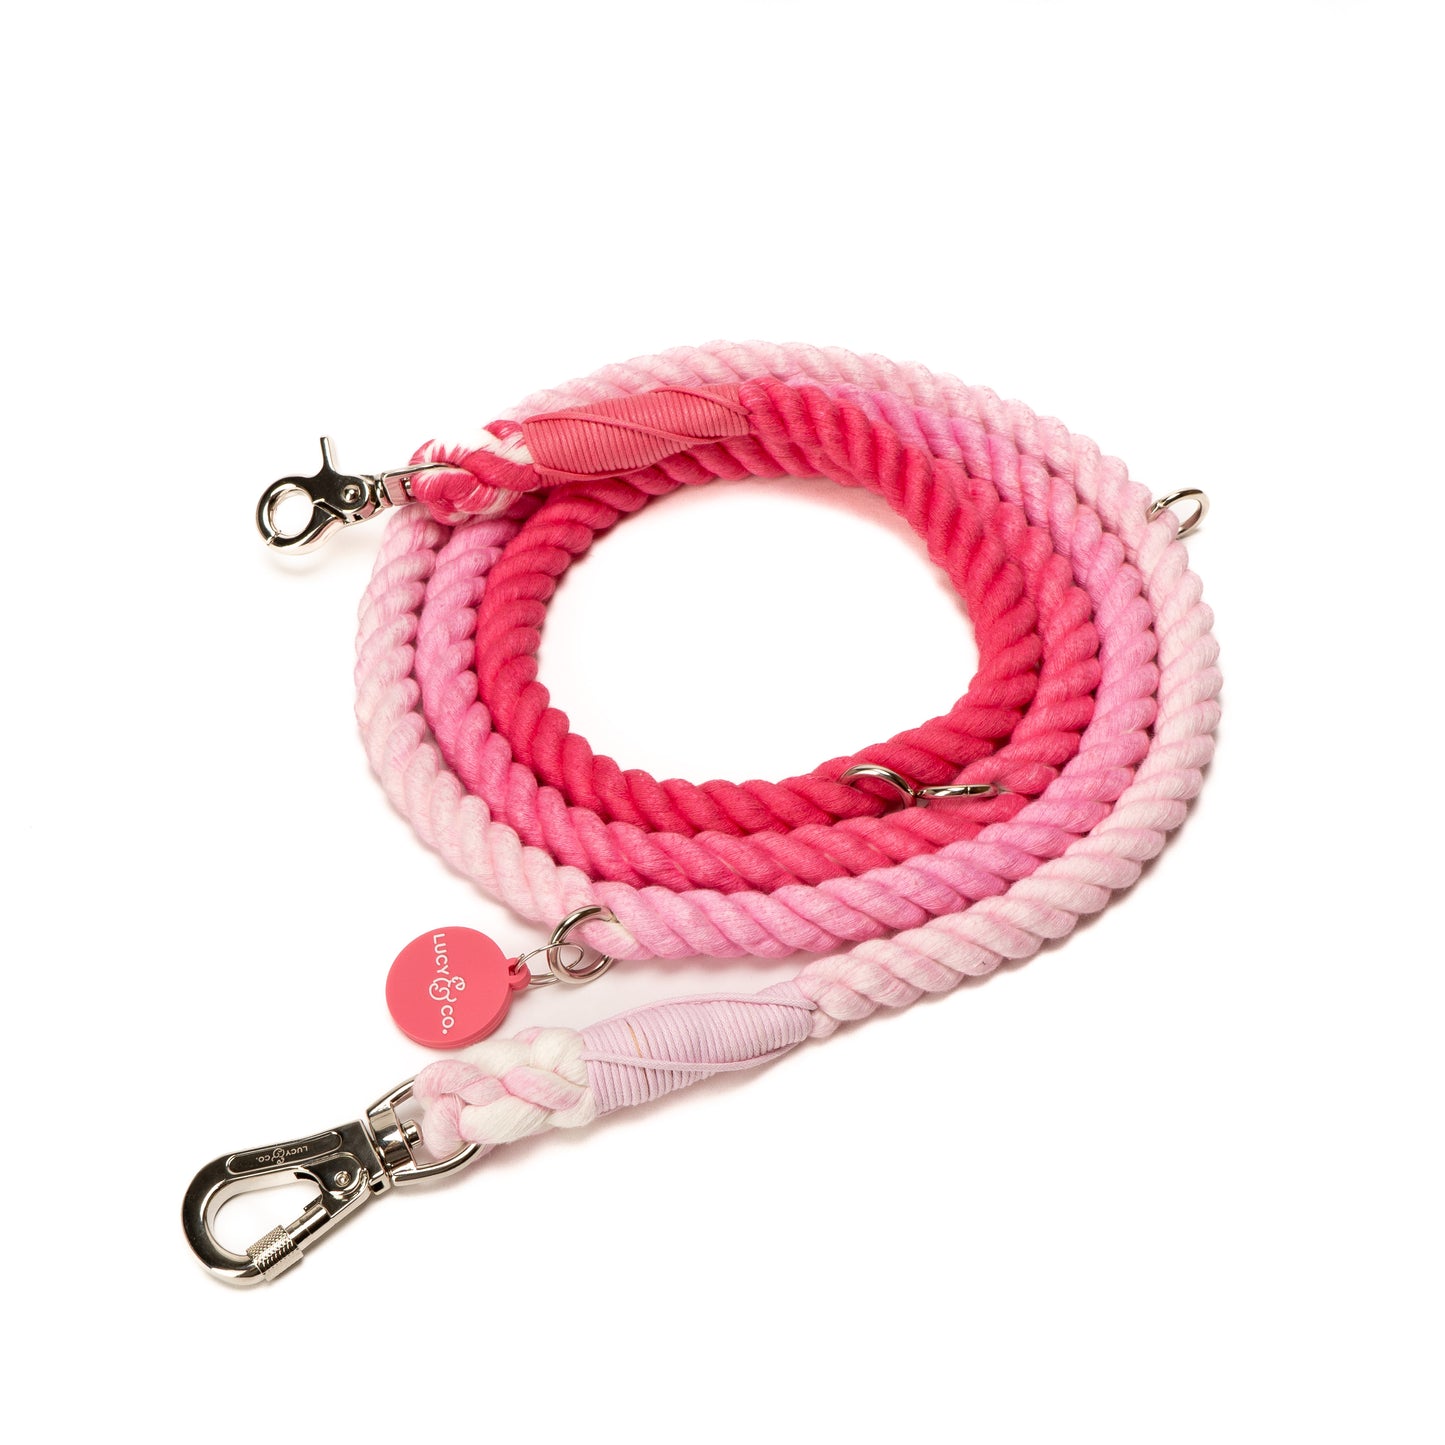 The Cupid's Crush Hands-Free Rope Leash